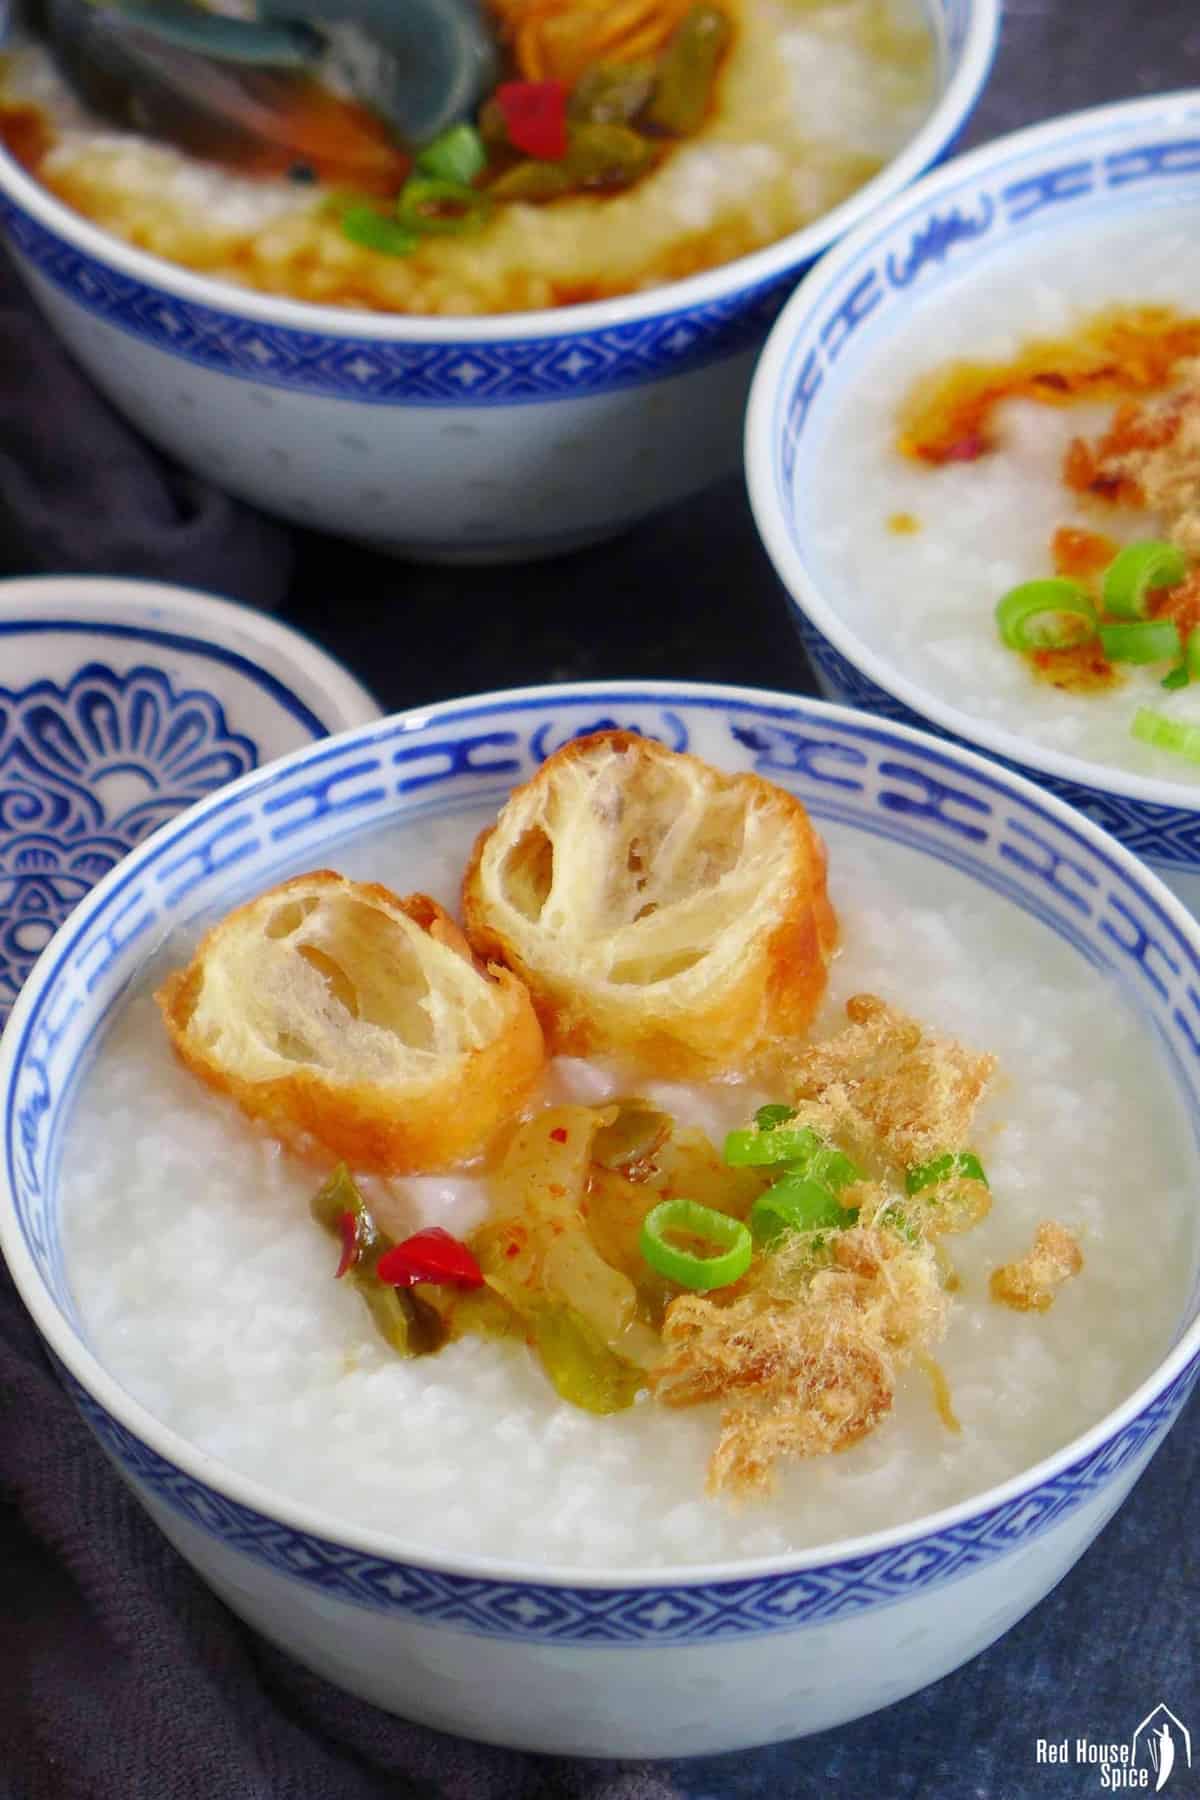 three bowls of plain congee with different toppings